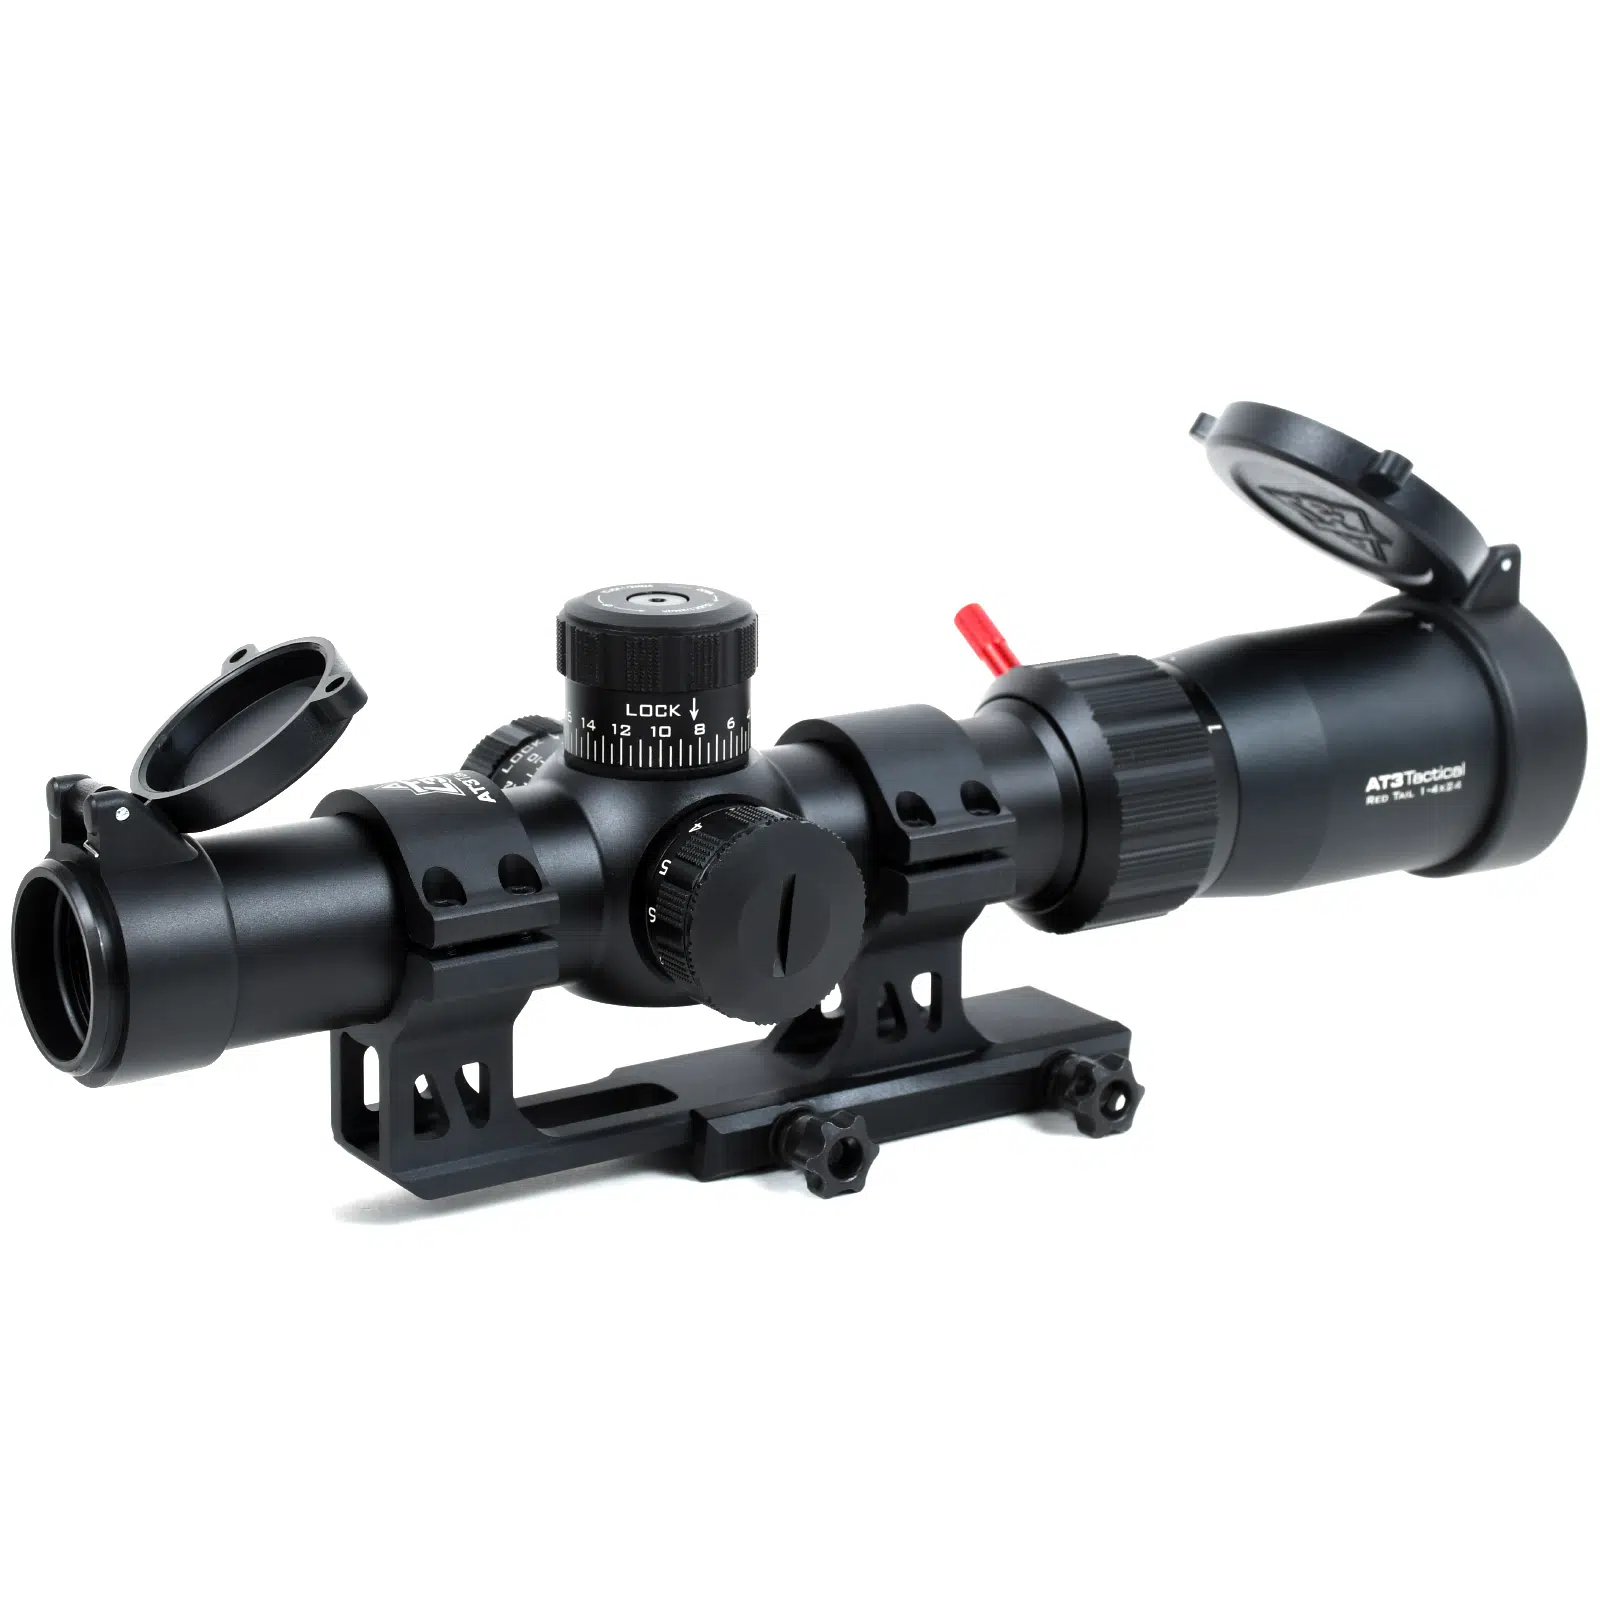 AT3™ Red Tail™ Rifle Scope with Locking Caps - 1-4x or 1-6x Magnification - 5.56 Illuminated BDC Reticle